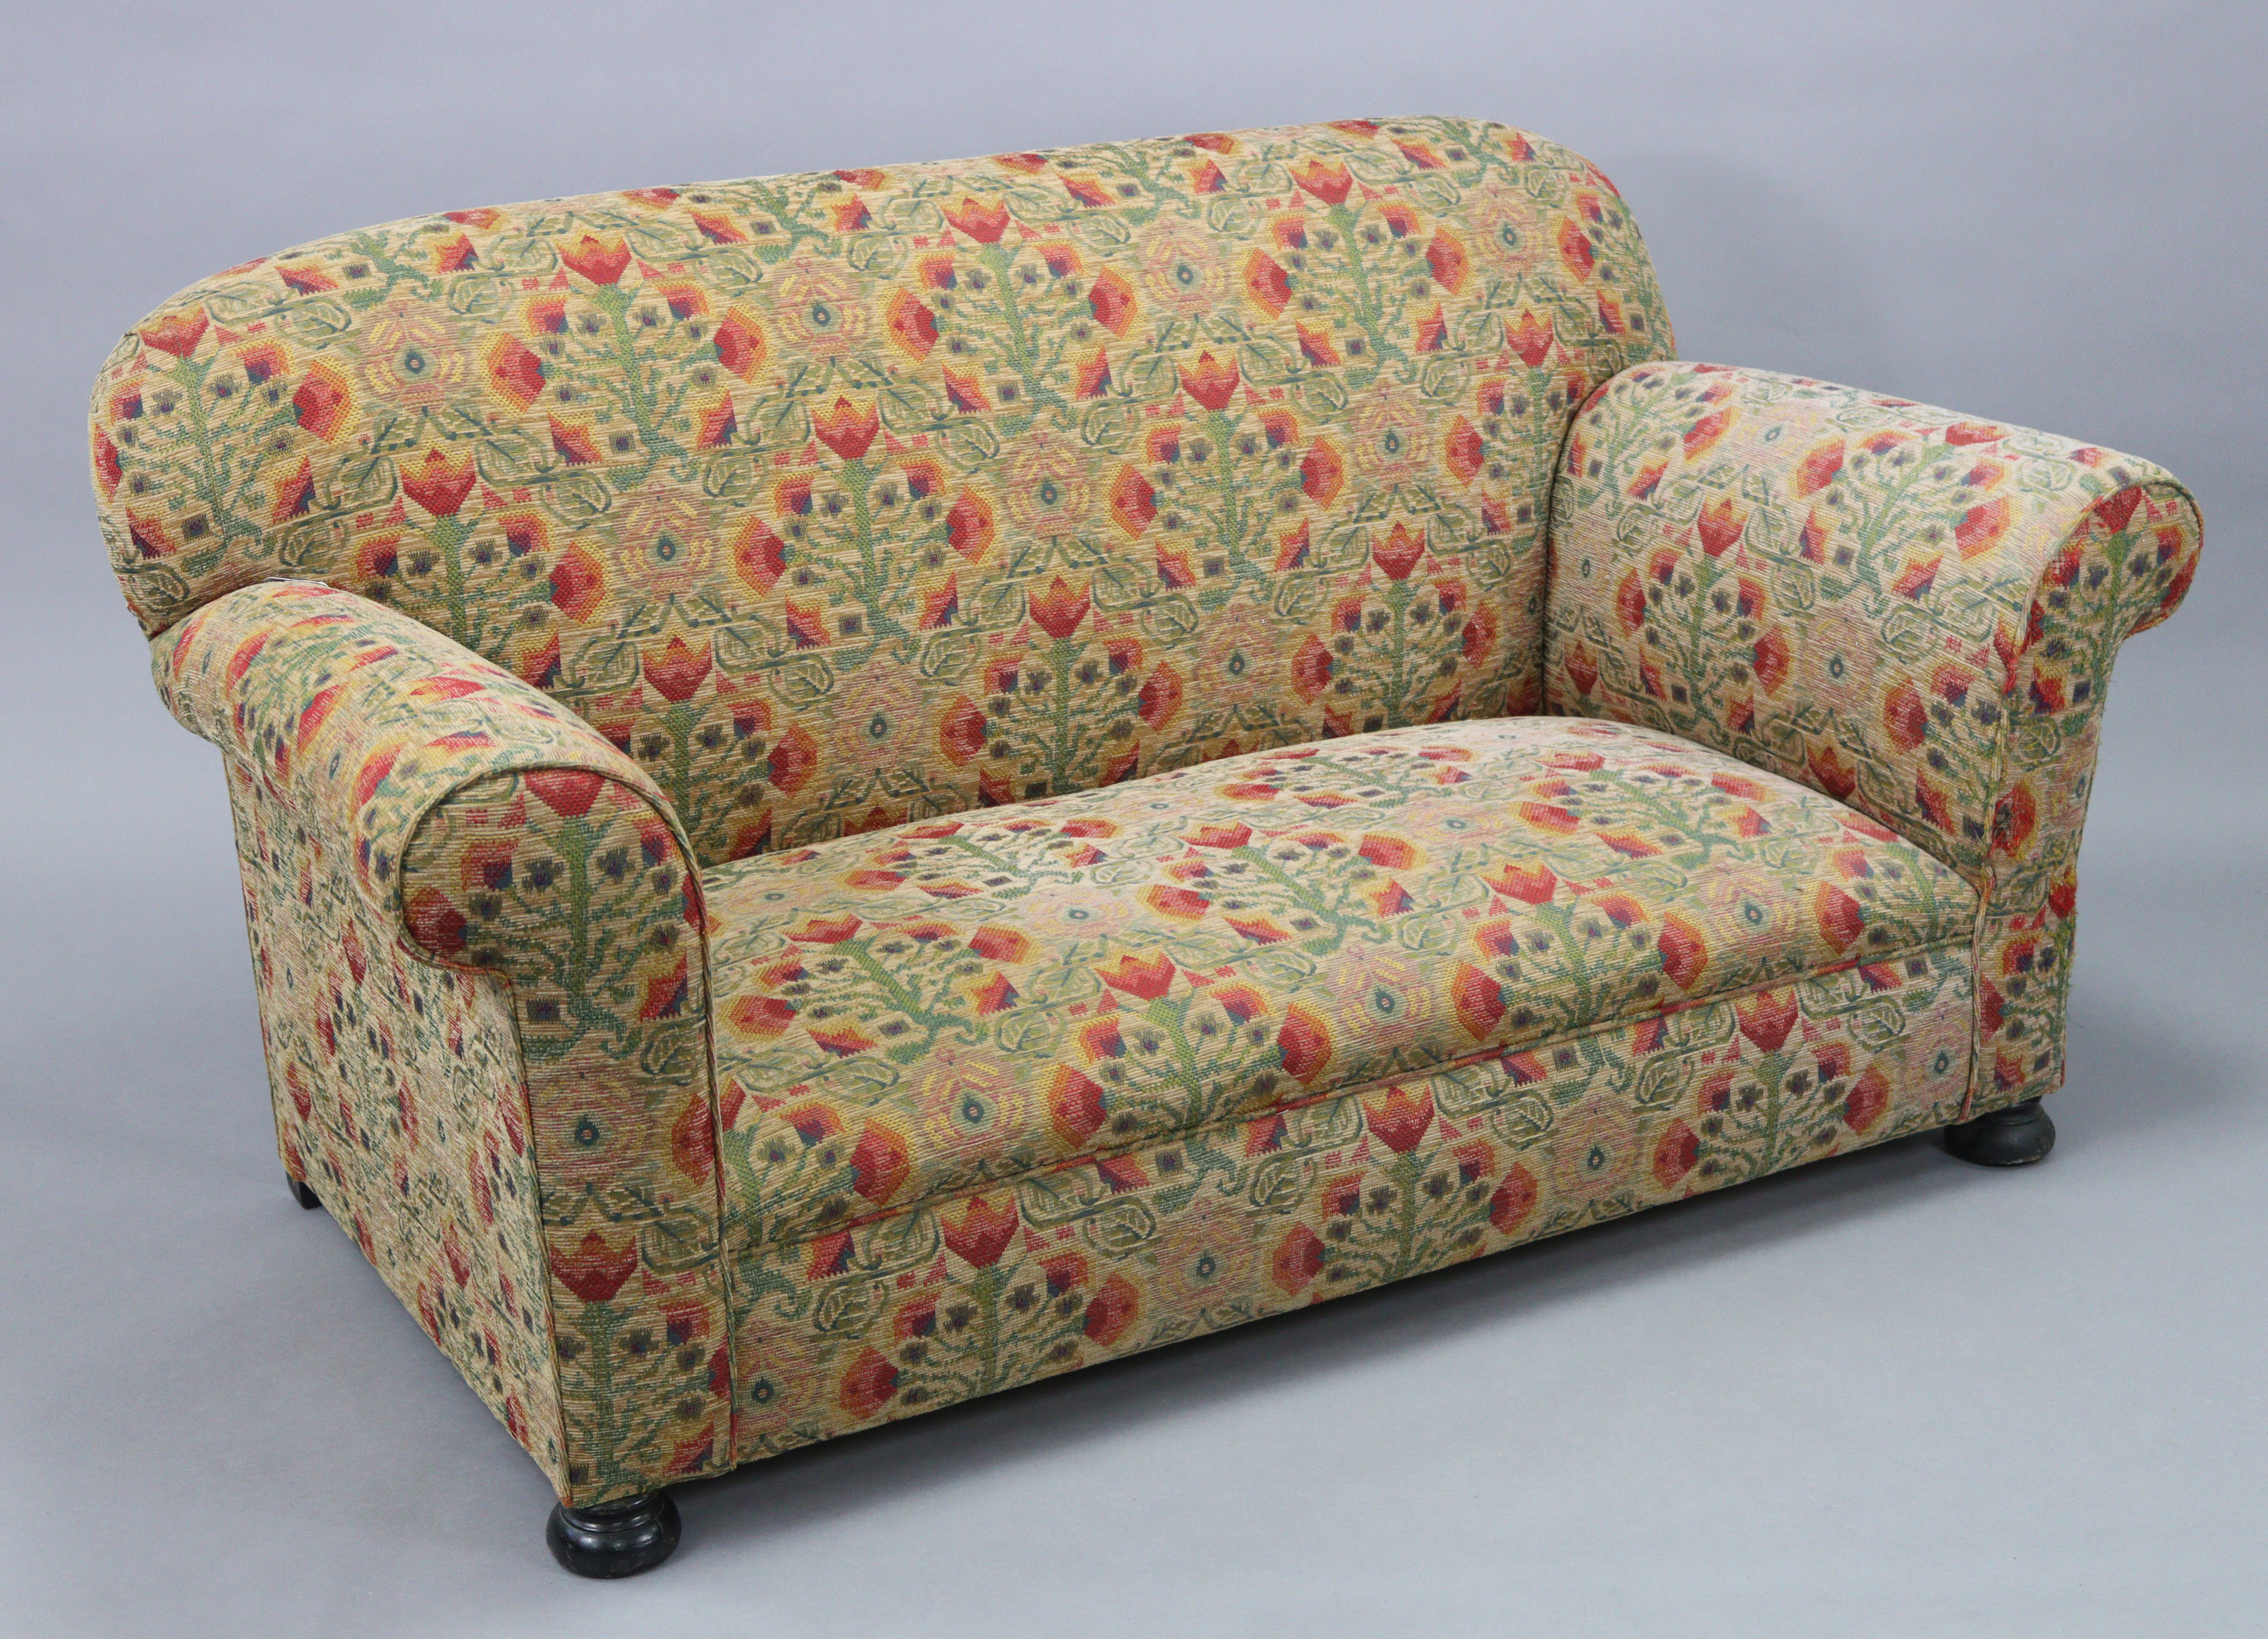 An early 20th century drop-end two-seater settee with rounded back, scroll-arms & sprung seat - Image 2 of 3